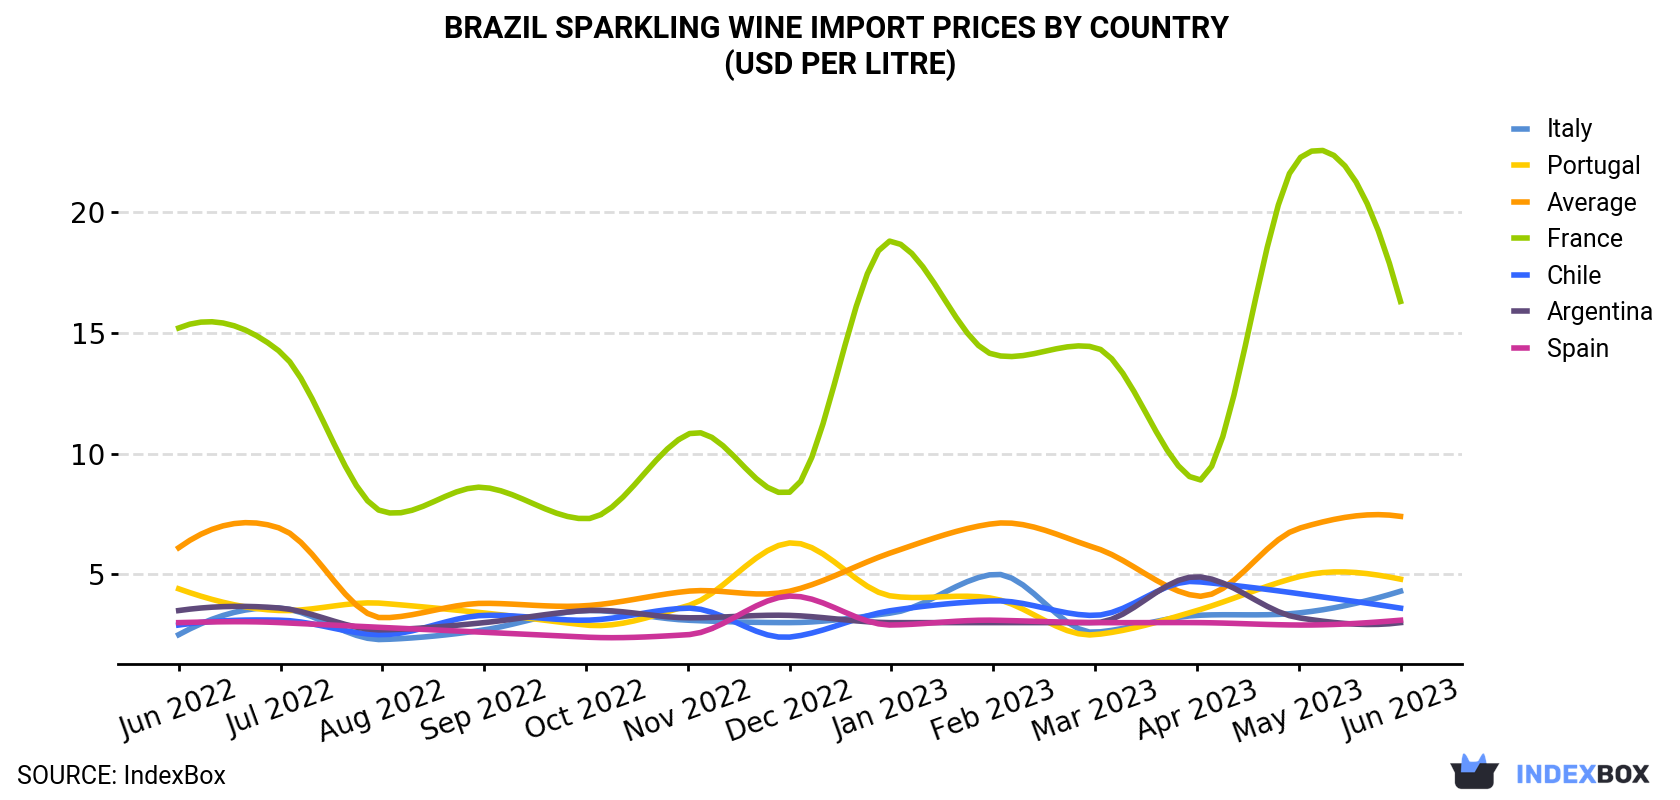 Brazil Sparkling Wine Import Prices By Country (USD Per Litre)